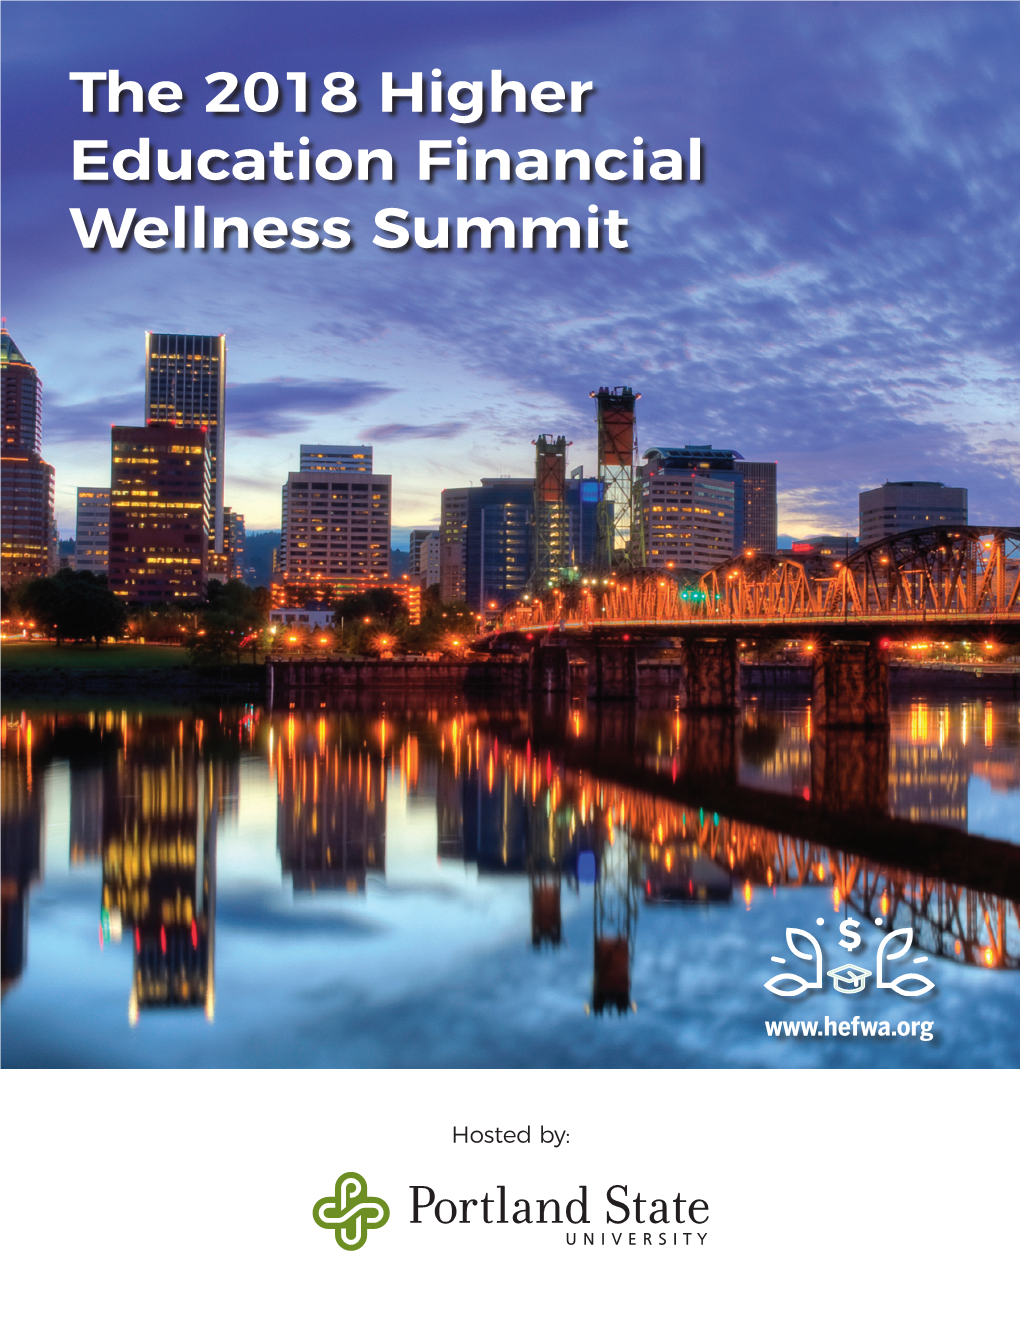 The 2018 Higher Education Financial Wellness Summit